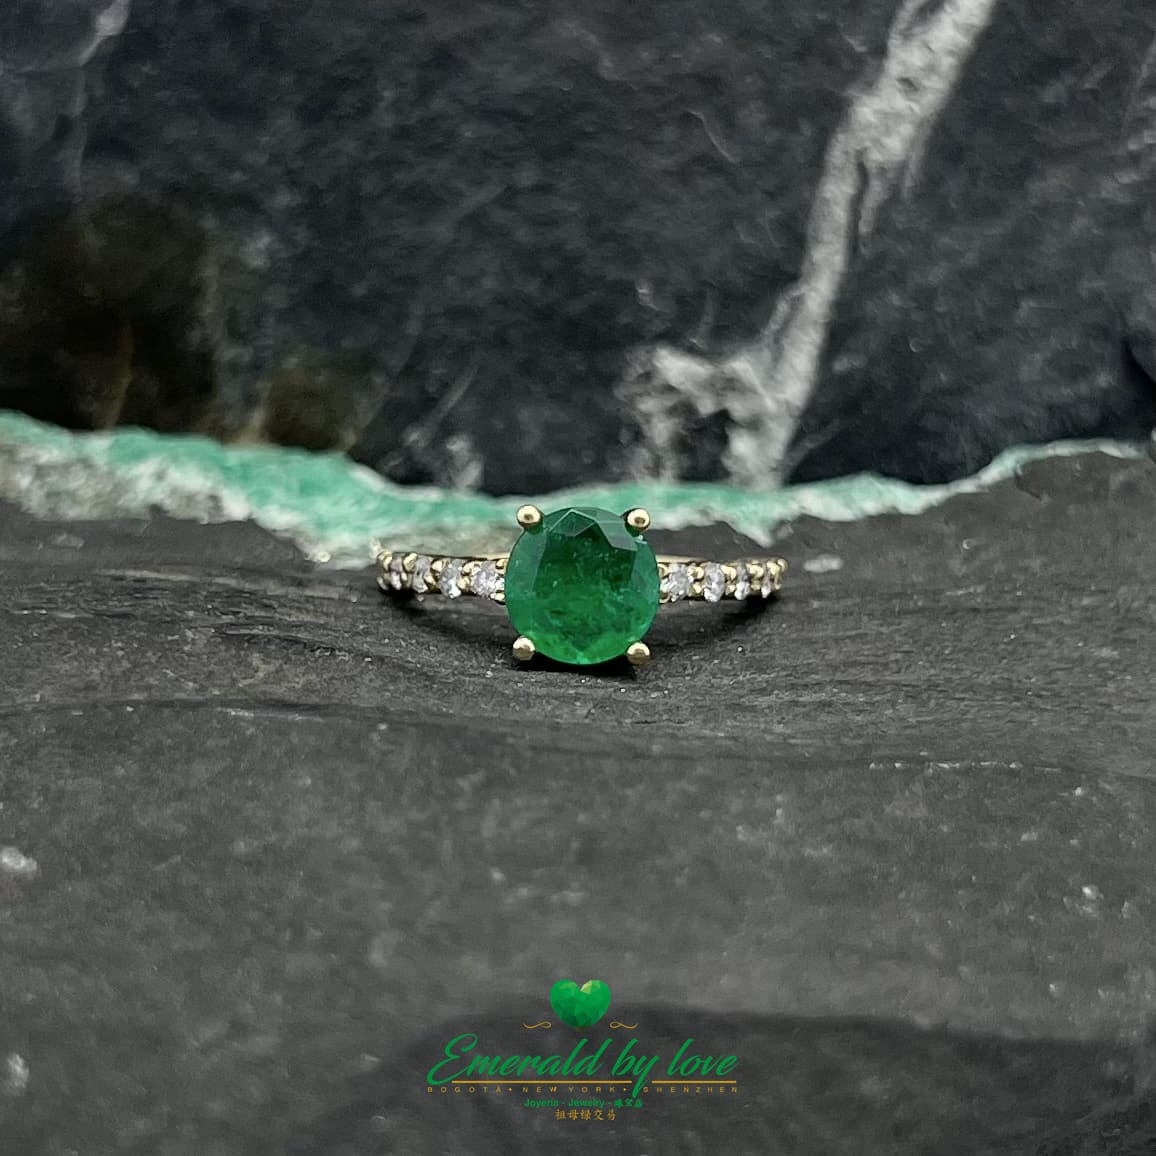 Eternal Enchantment: Yellow Gold Ring with Vivid Round Emerald and Diamond Encrusted Band